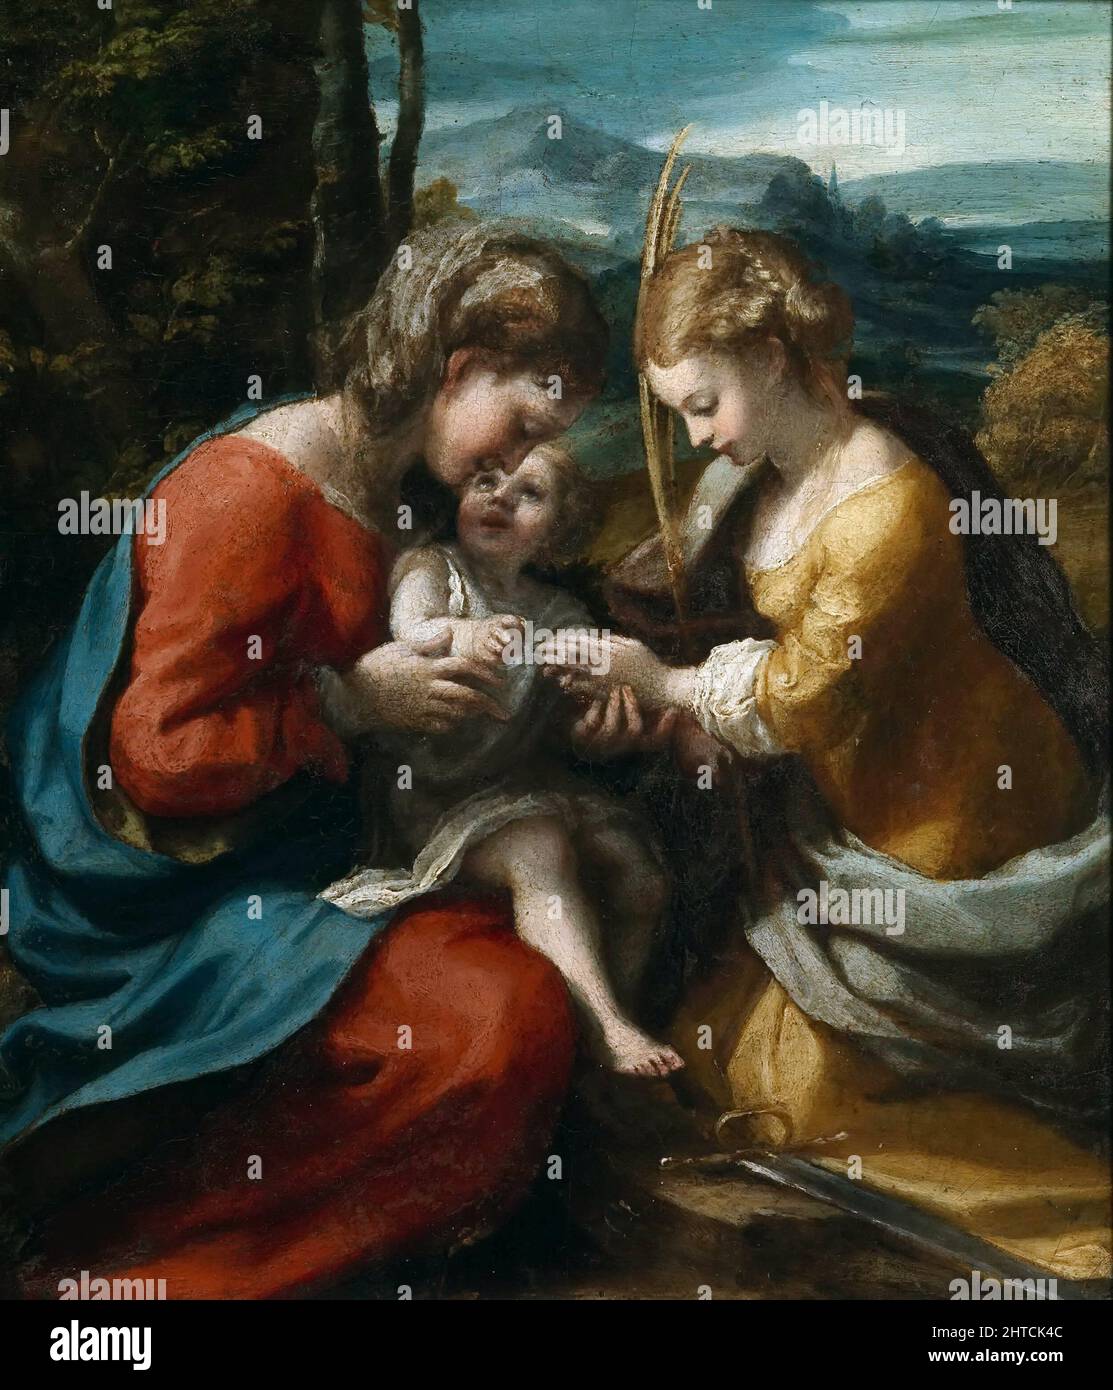 The Mystical Marriage of Saint Catherine, 1517-1518. Found in the Collection of the Museo di Capodimonte, Naples. Stock Photo